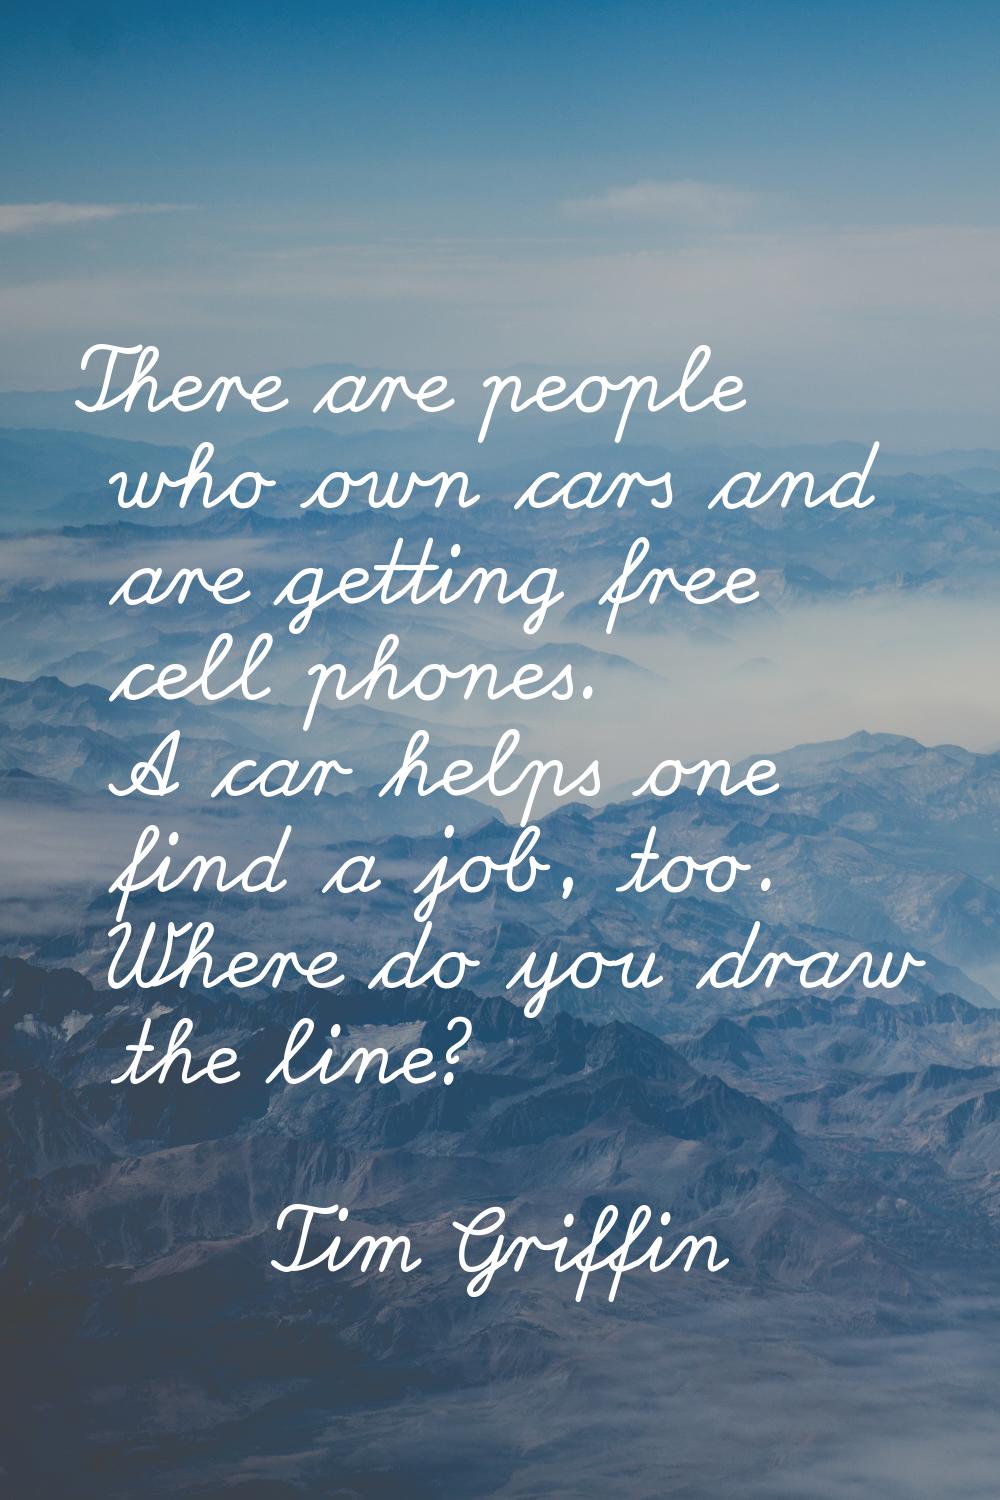 There are people who own cars and are getting free cell phones. A car helps one find a job, too. Wh